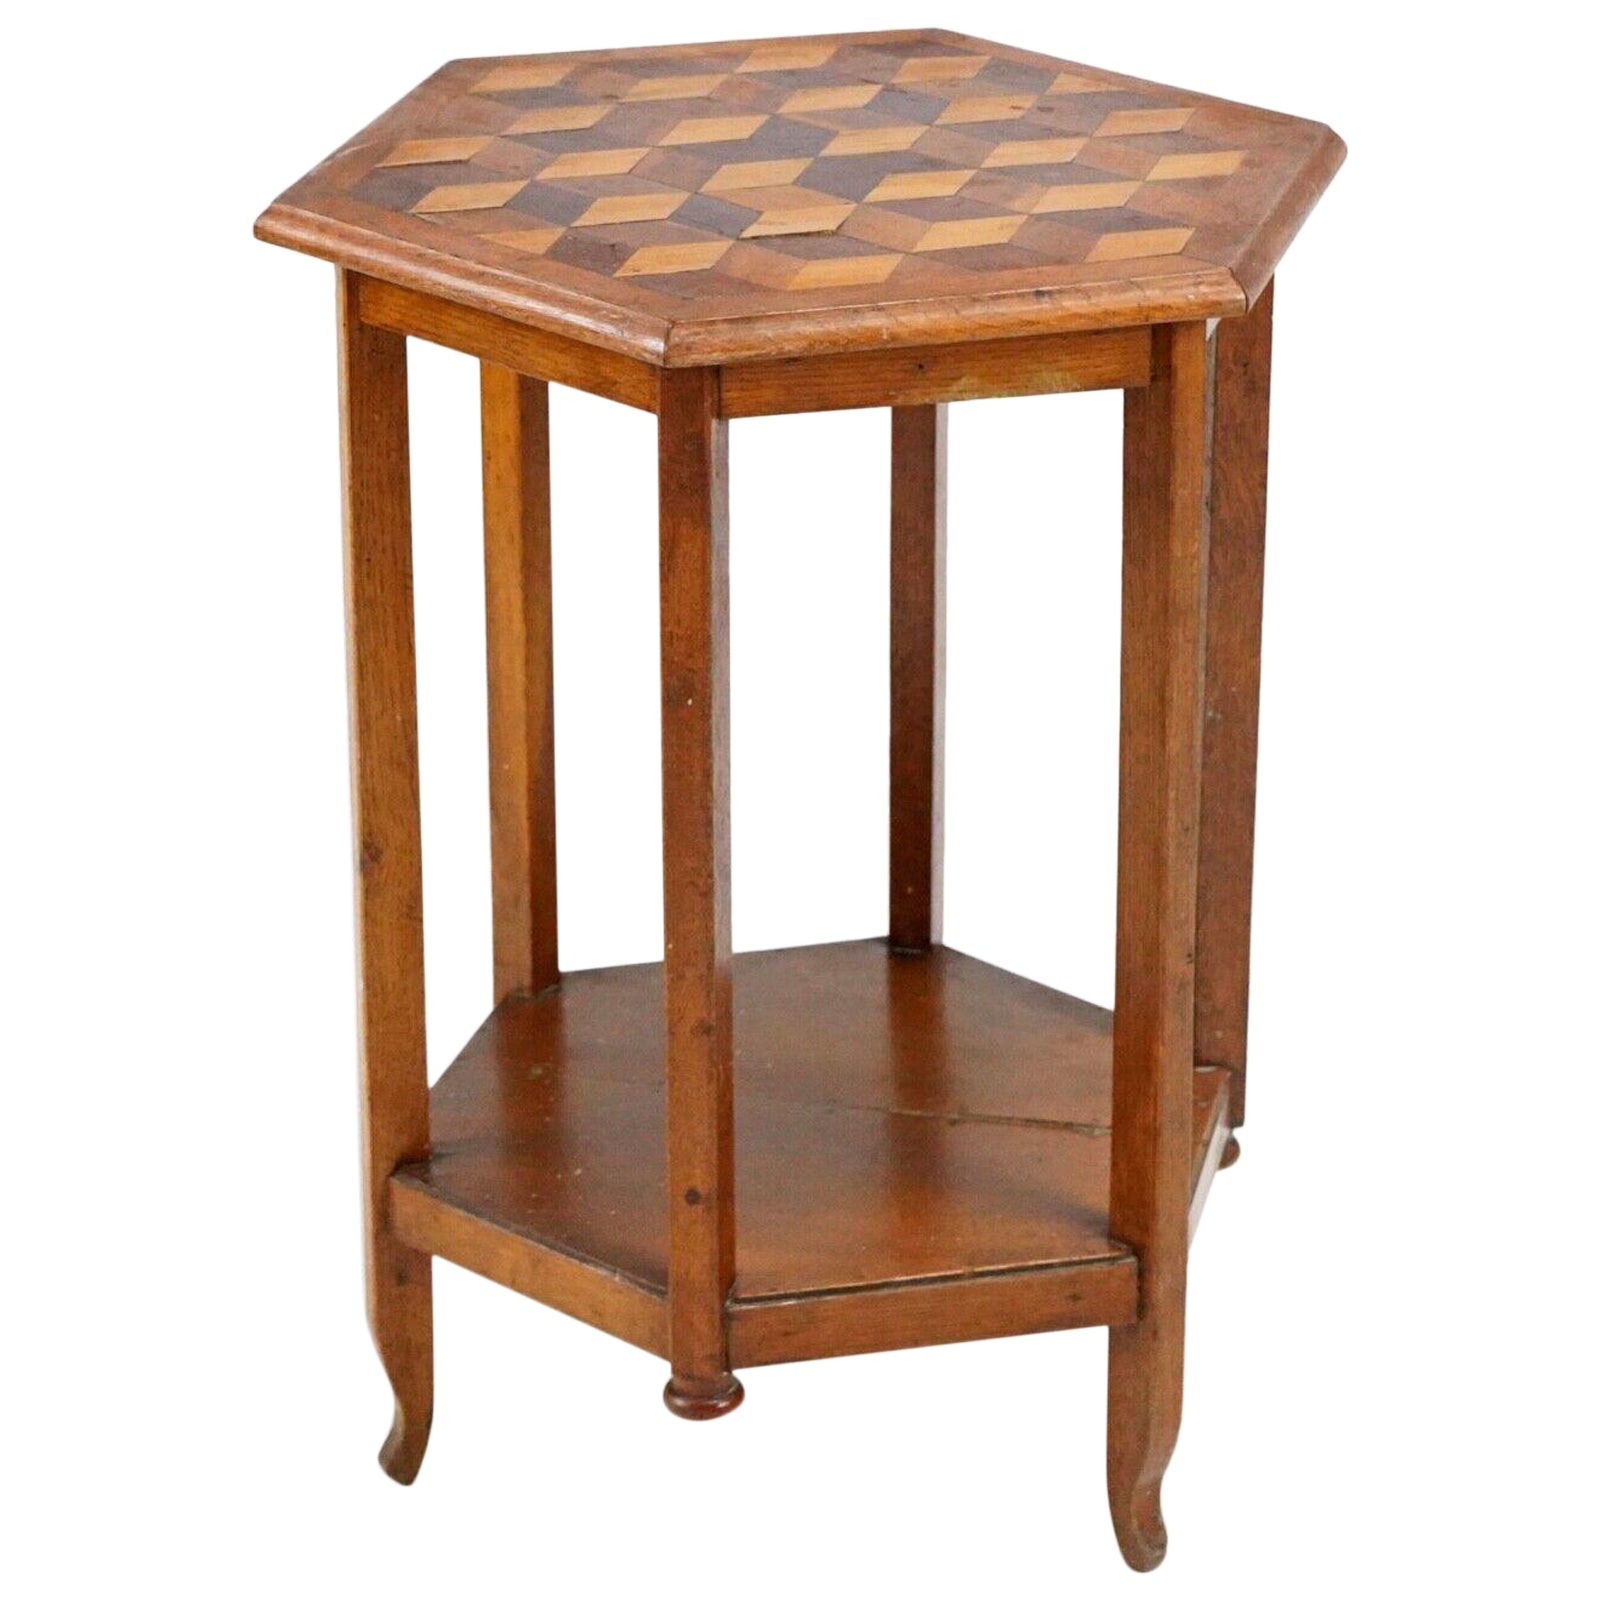 Antique Oak Hexagonal Cubist Parquetry Top Side Table - Country House For Sale